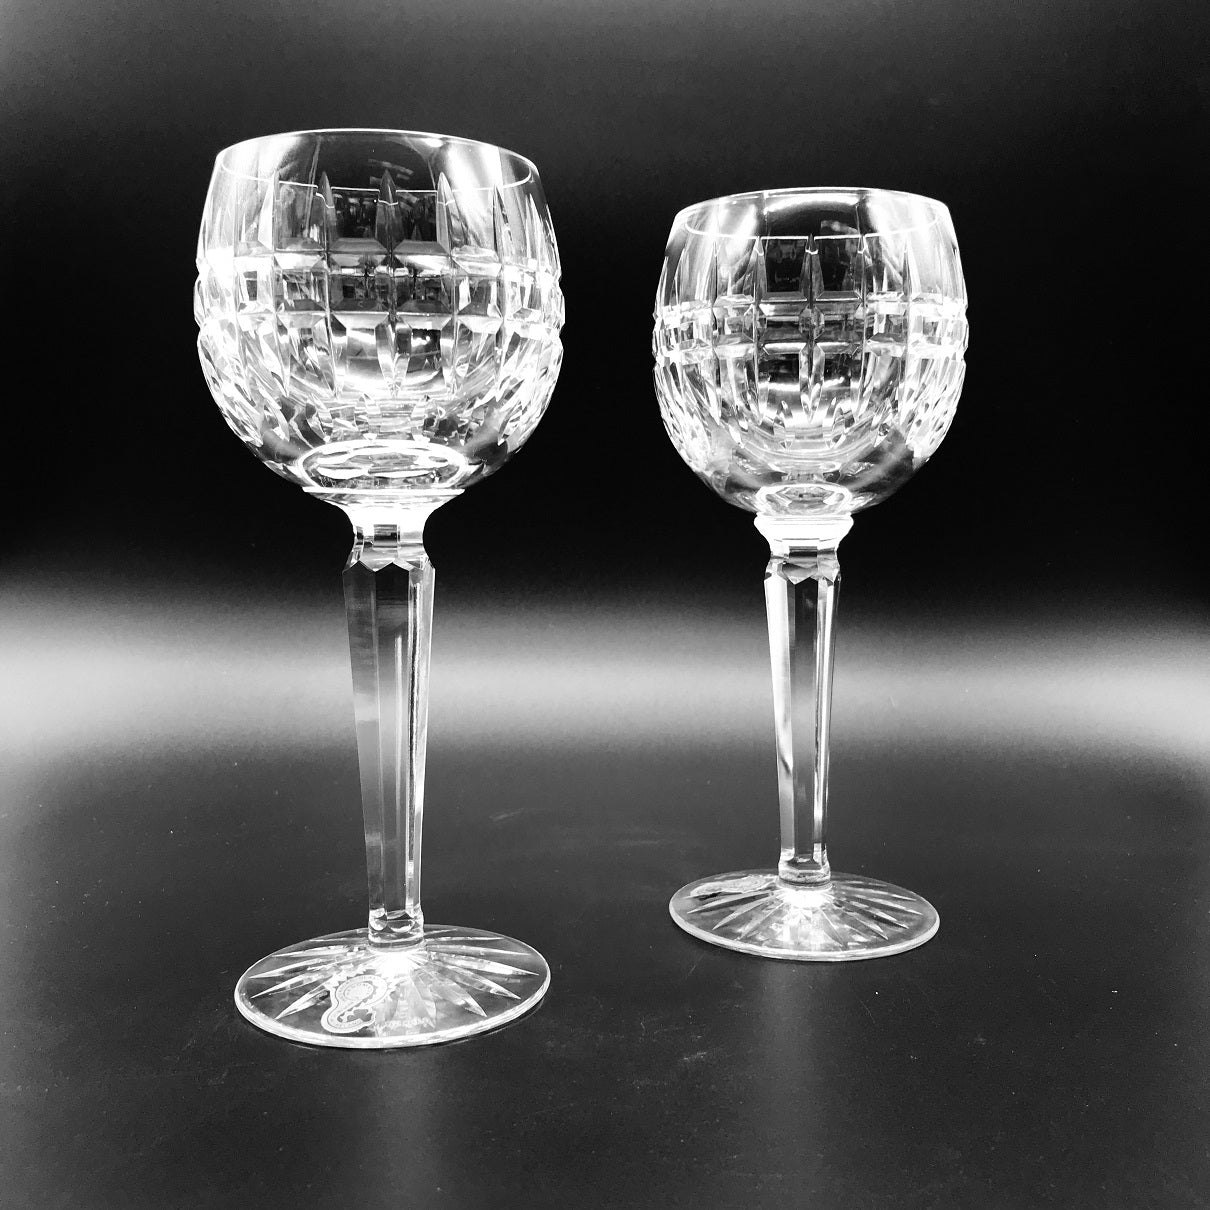 Waterford Glenmore HockWaterford Crystal Glenmore Hock Pair  The Waterford Glenmore pattern is a stunning combination of brilliance and clarity. The intricate detailing of Glenmore's signature line cuts combine with the comforting weight of Waterford's hand-crafted fine crystal to produce a stunning piece of drinkware that defines traditional styling even while transcending it.